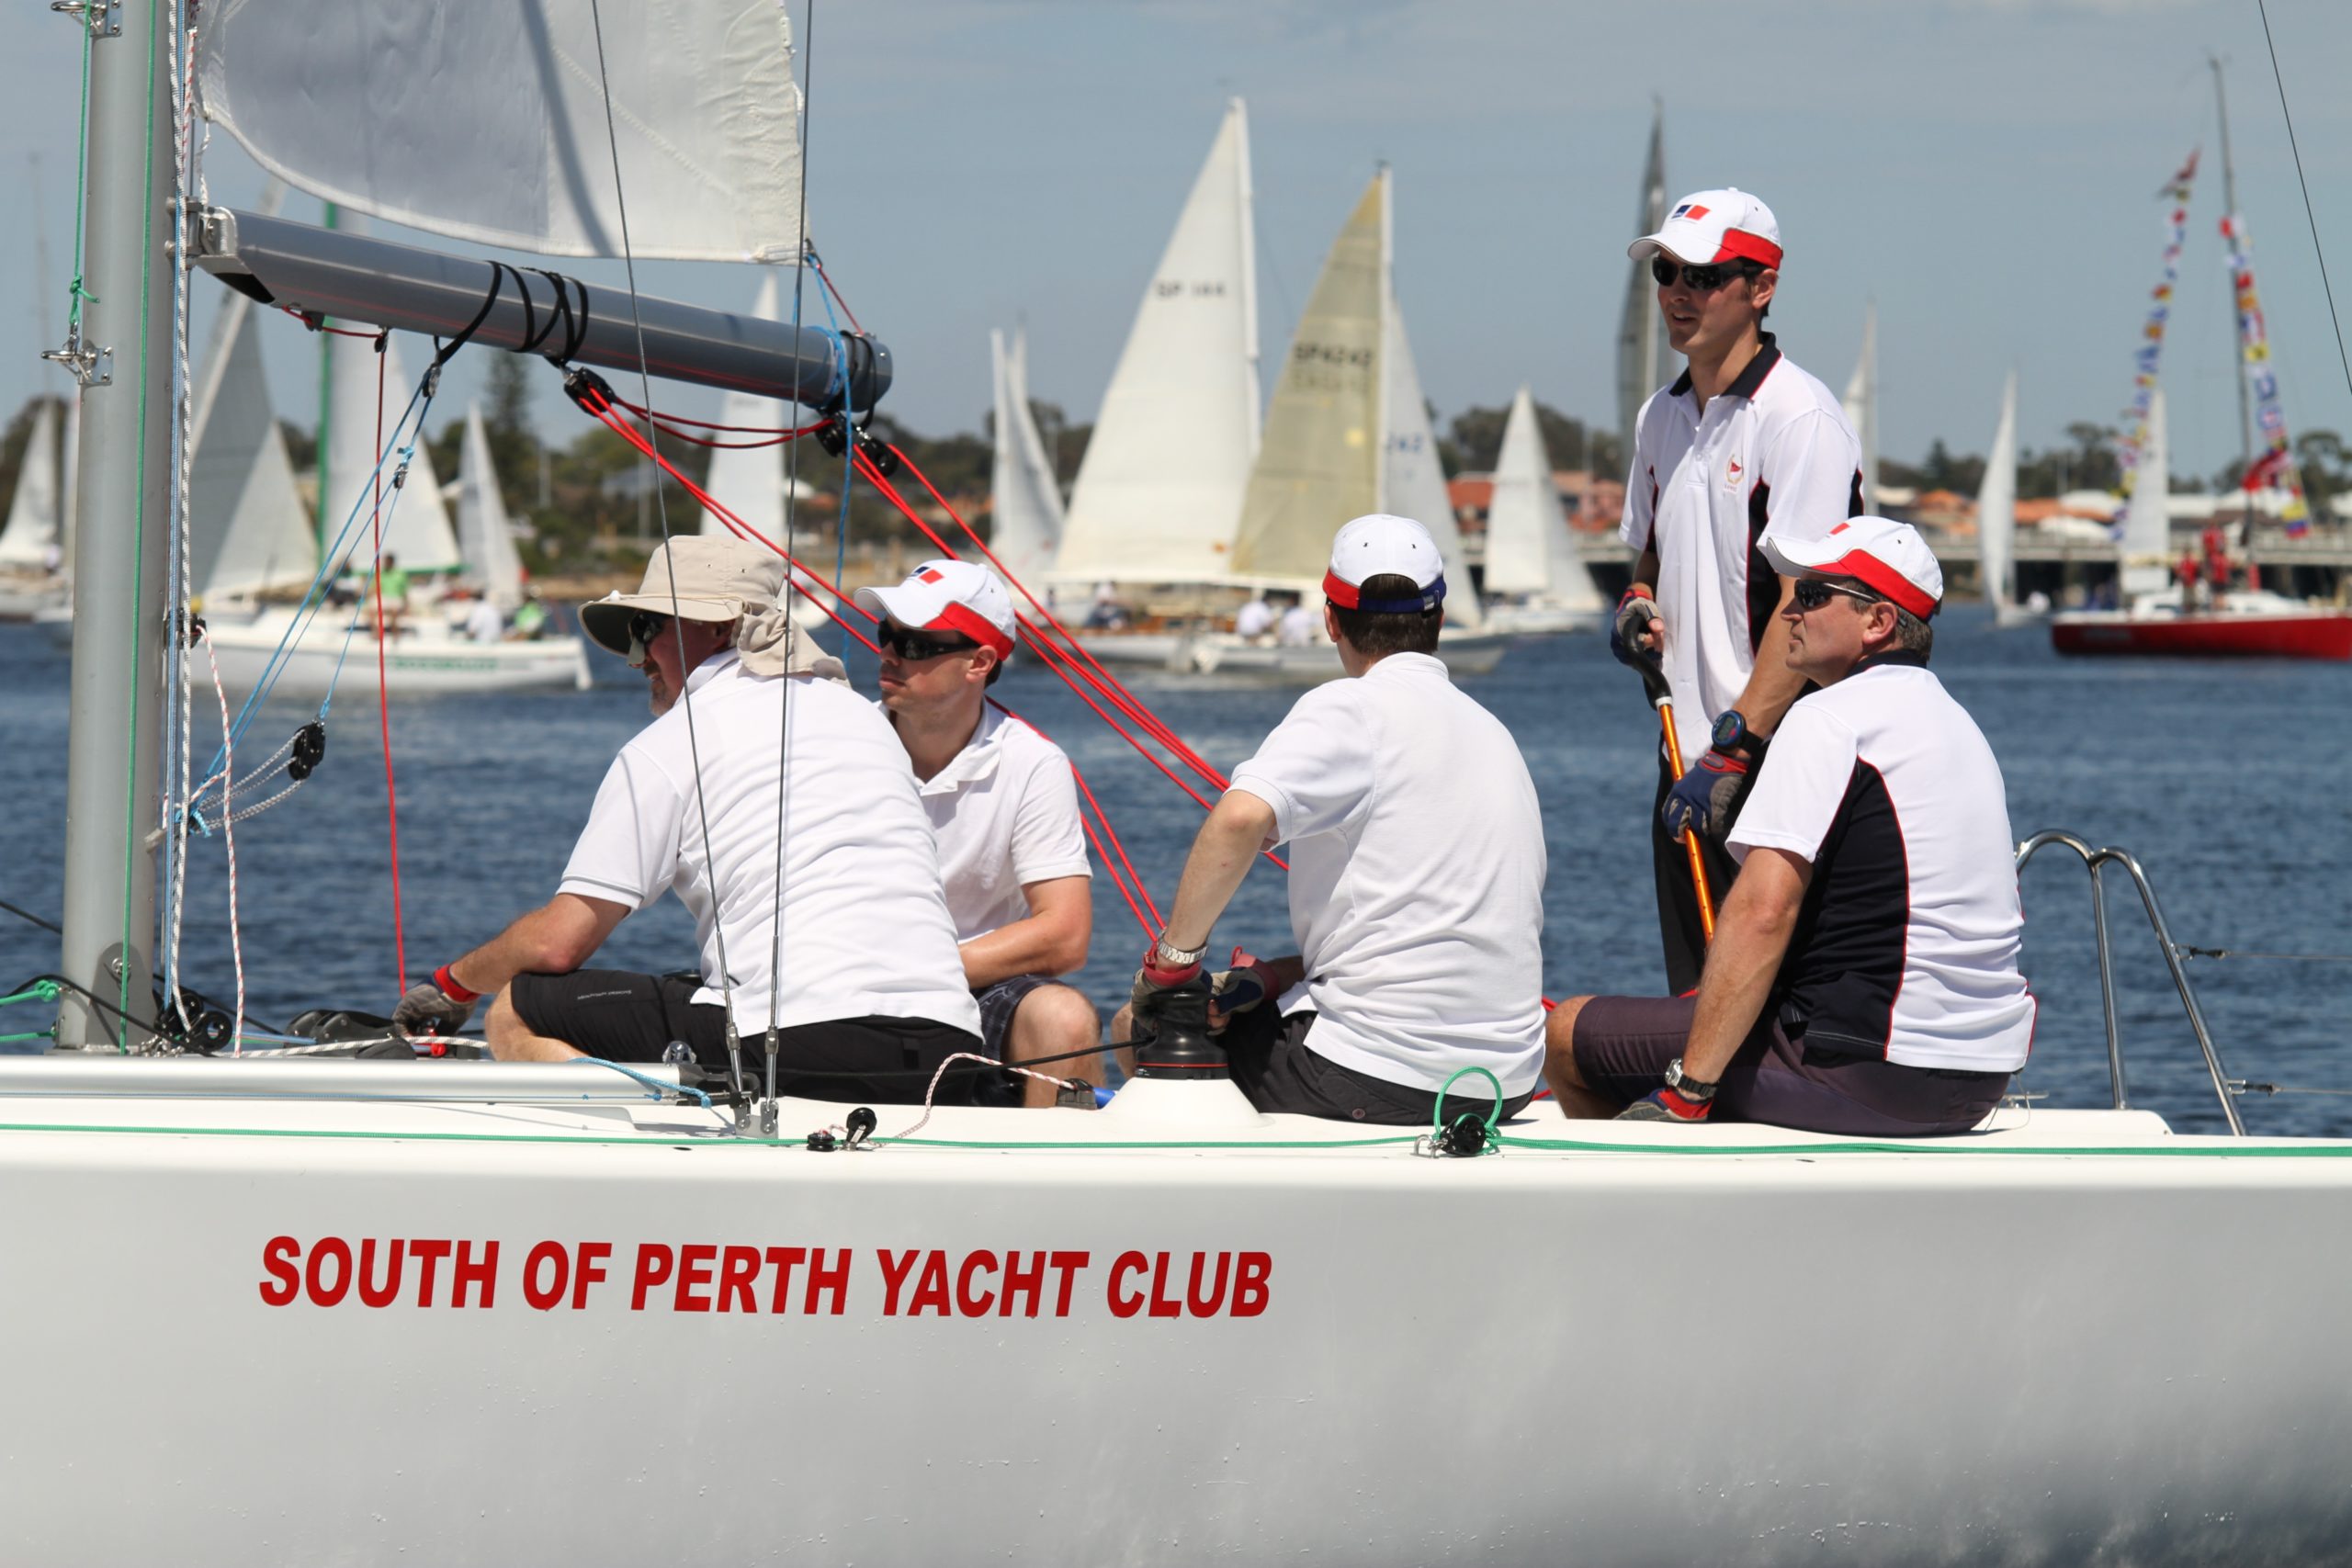 south of perth yacht club melbourne cup